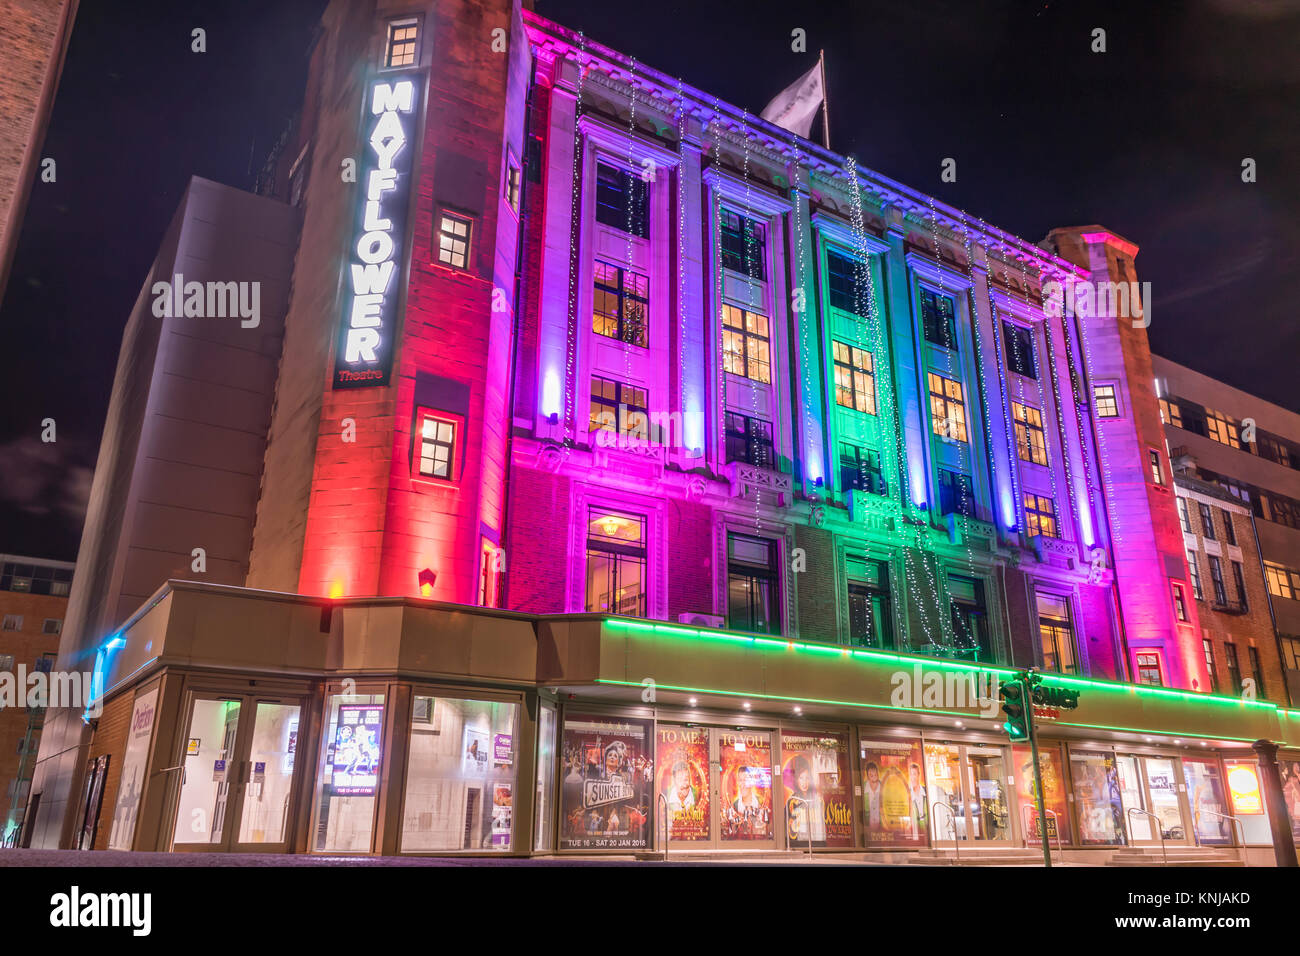 The illuminated colourful front facade of the Mayflower Theatre in Southampton during December 2017, England, UK Stock Photo